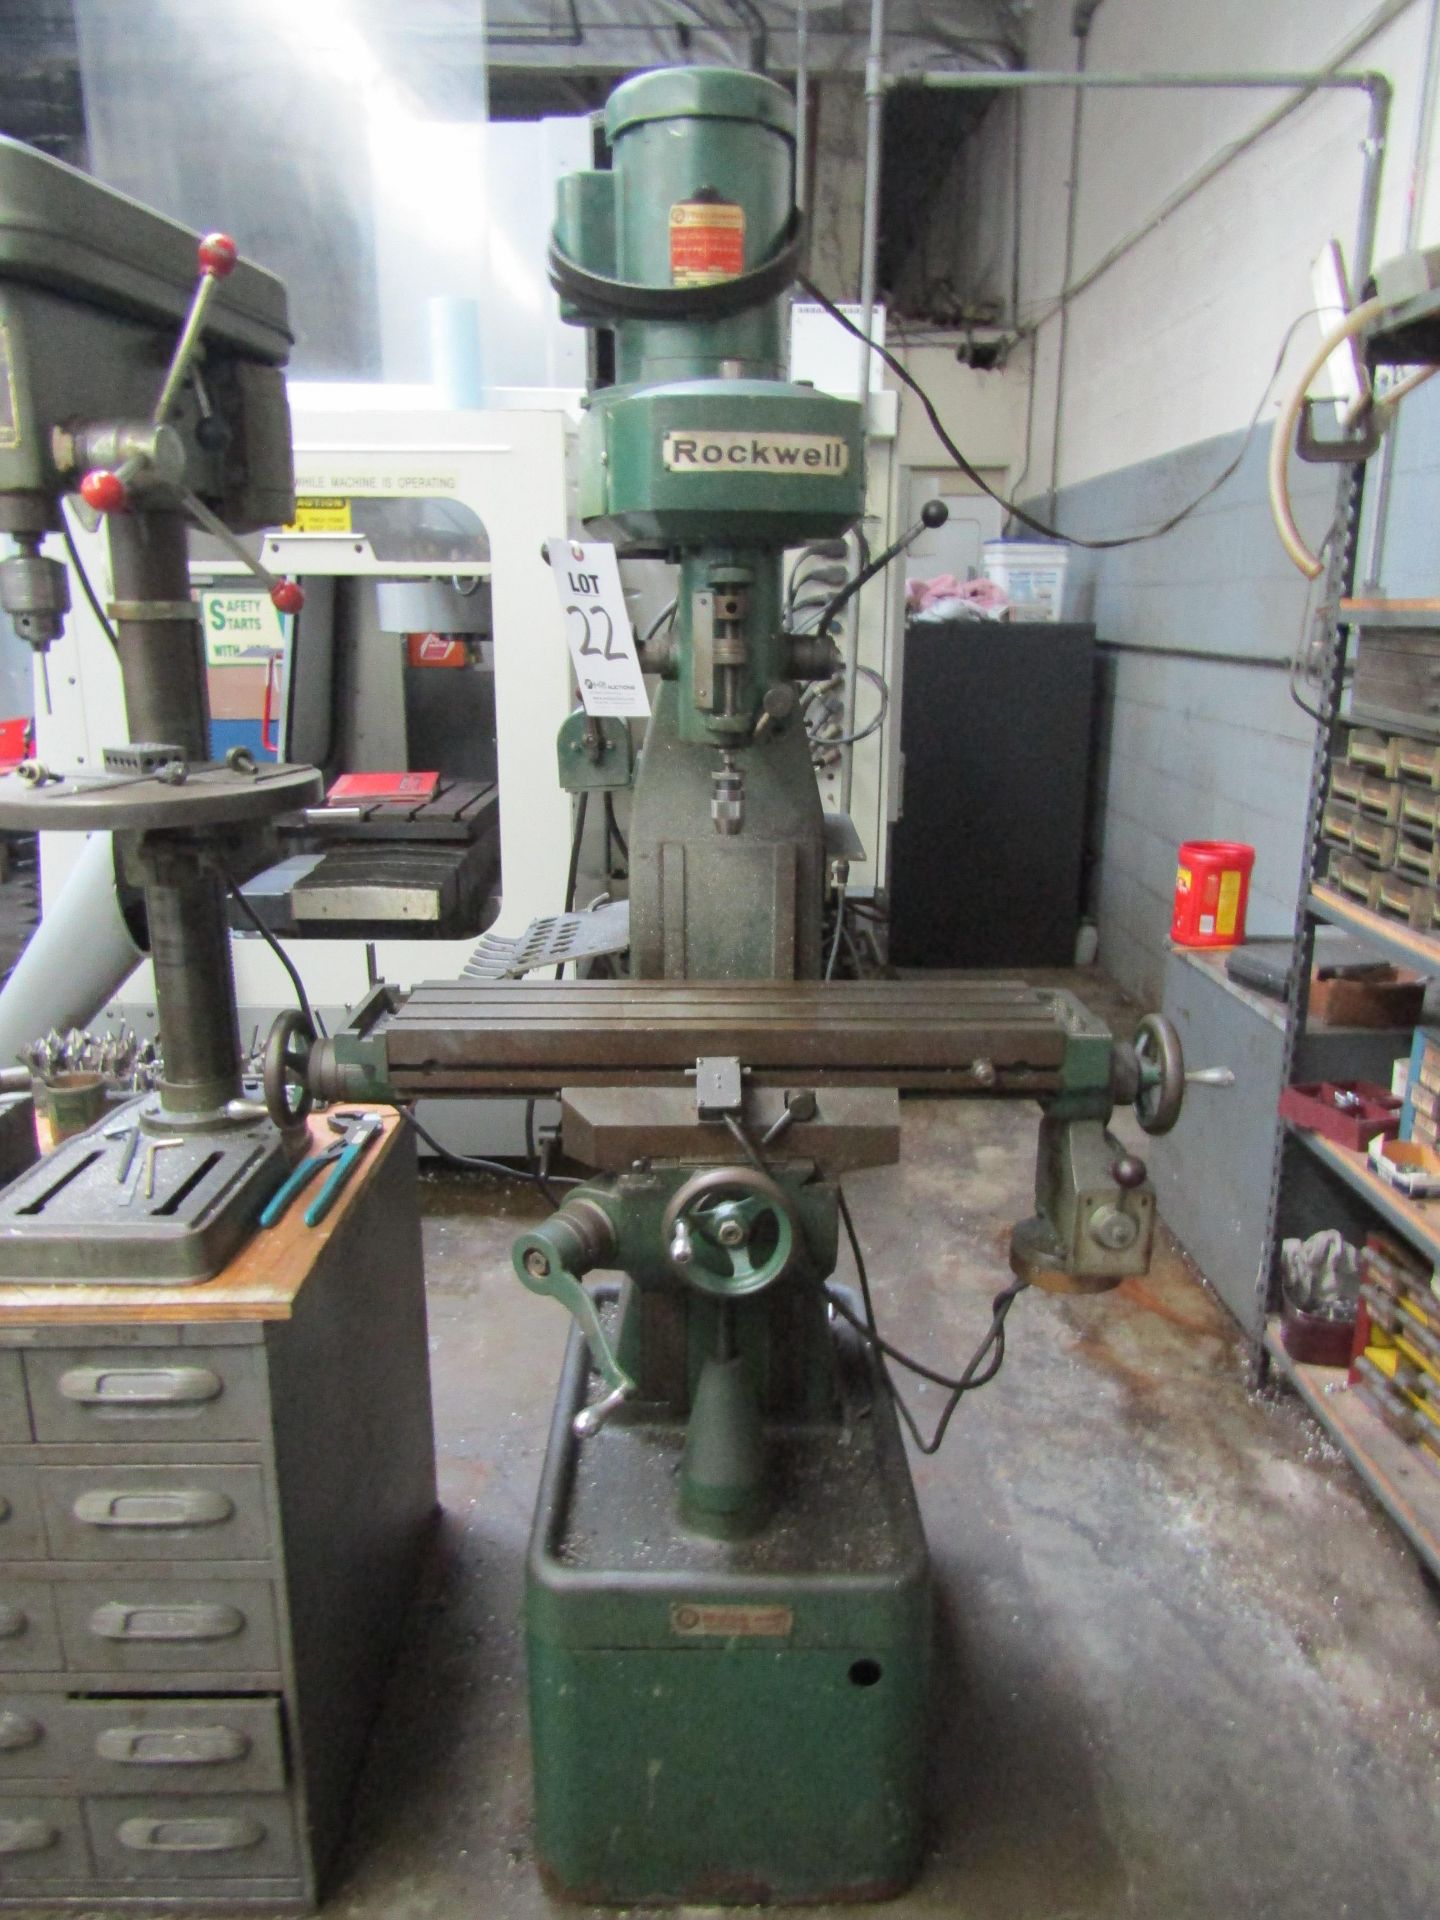 ROCKWELL VERTICAL MILLING MACHINE TYPE 22, MODEL 1225350, TABLE 7" X 28"